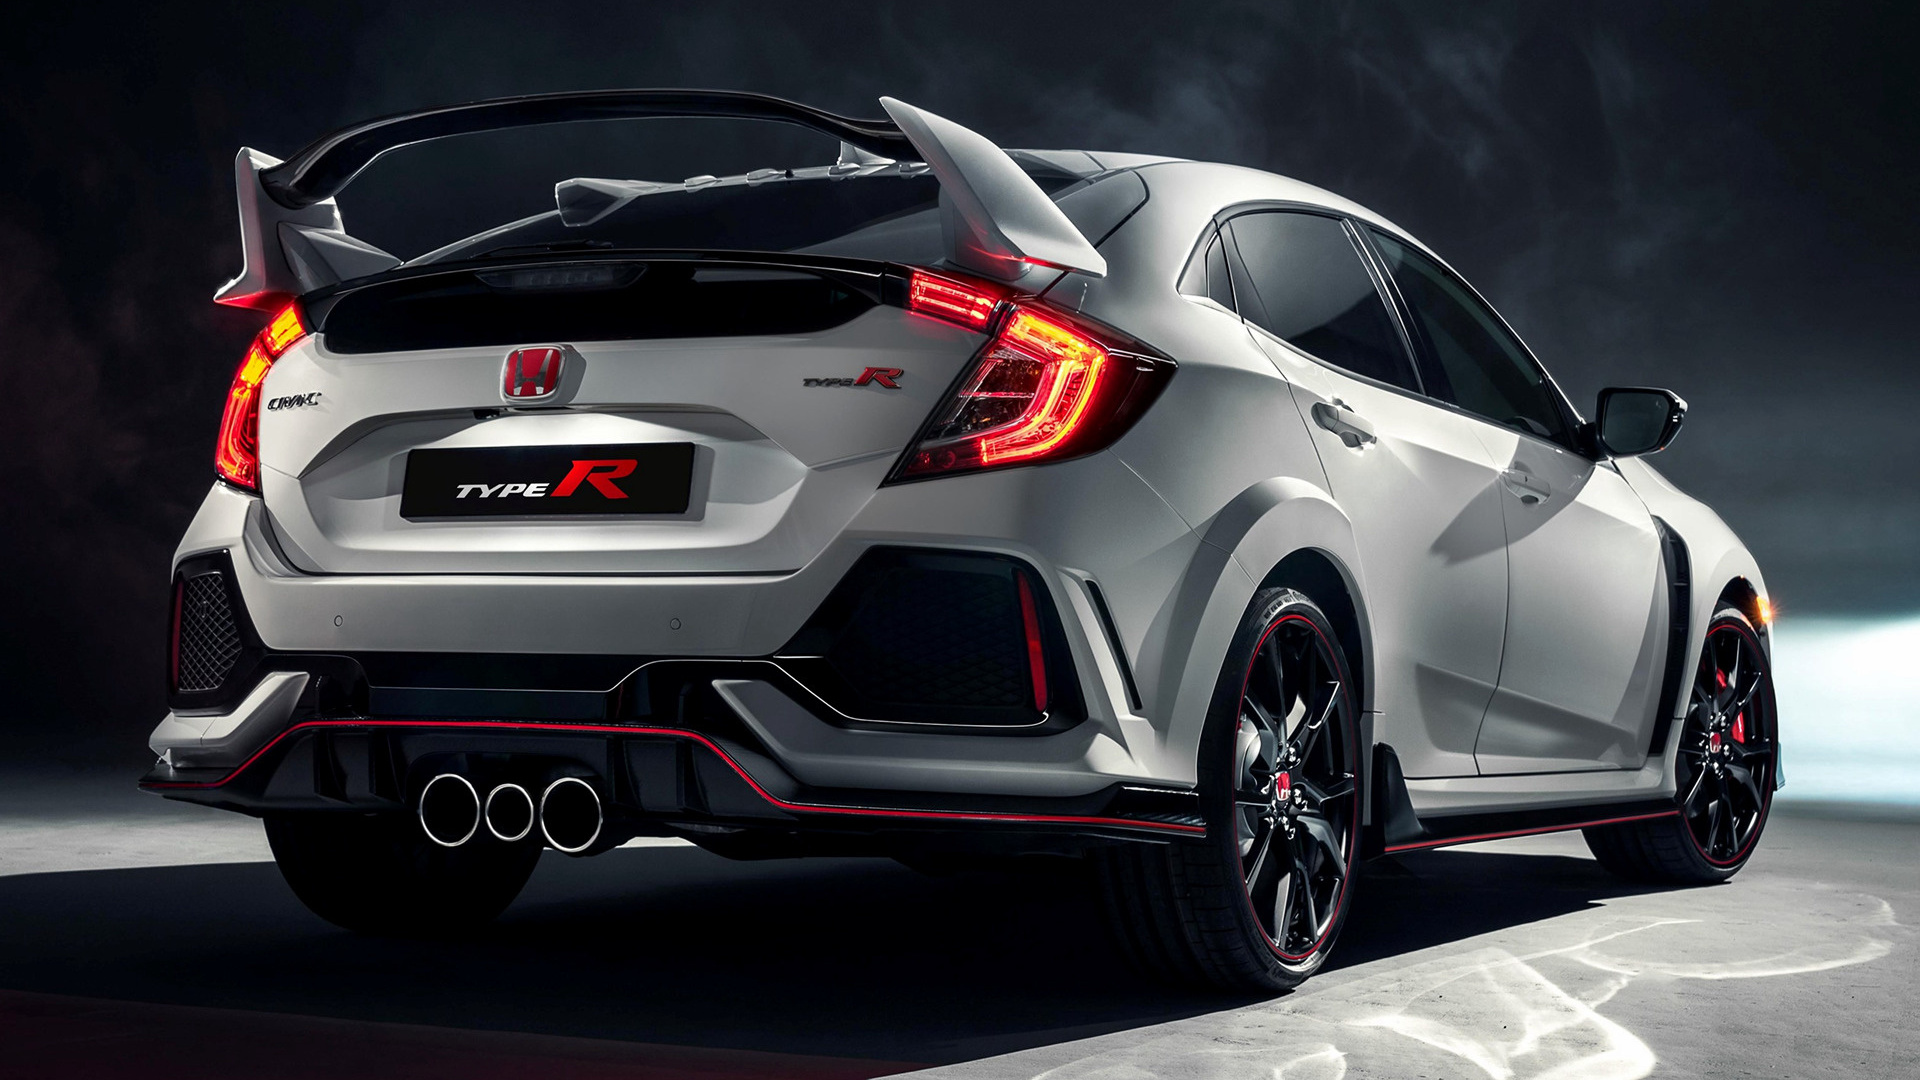 2017 Honda Civic Type R - Wallpapers and HD Images | Car Pixel